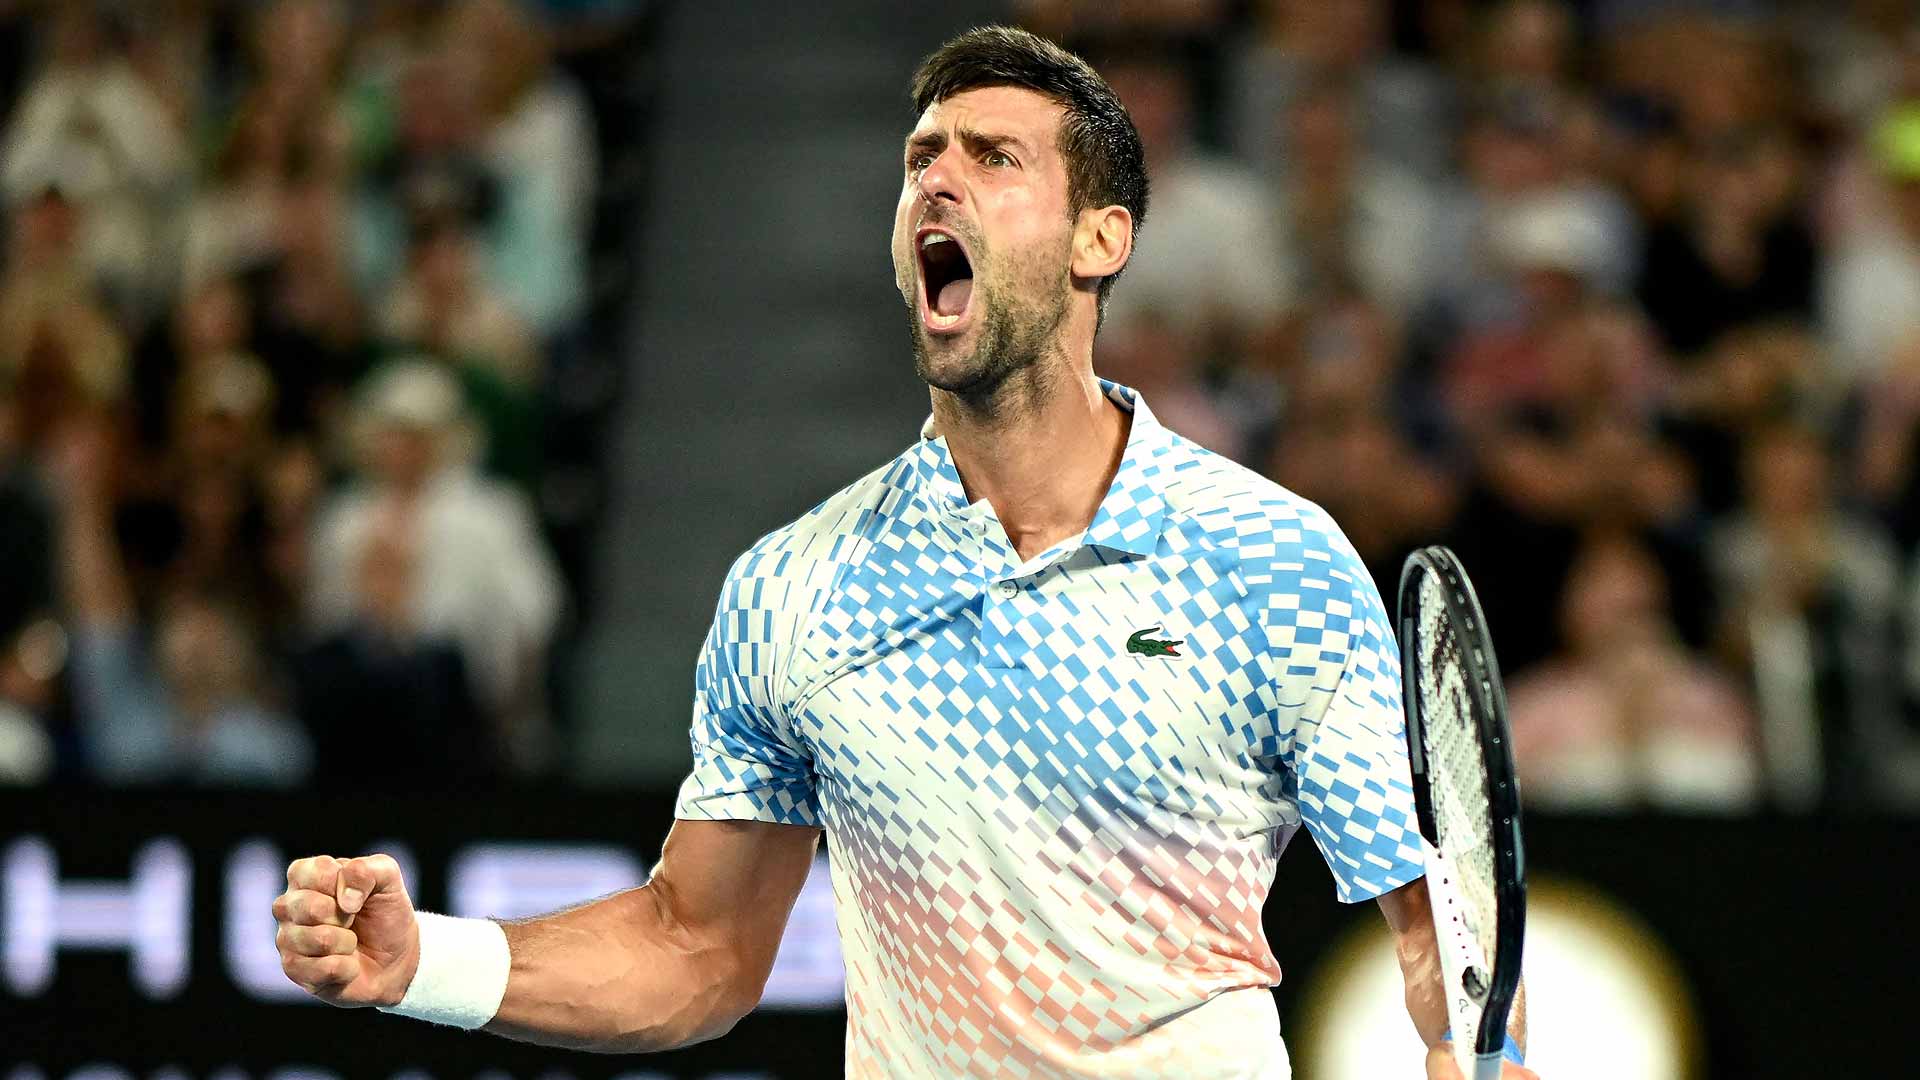 Djokovic shows a huge form, Paul superior in Americans duel - AO Day 10 Recap